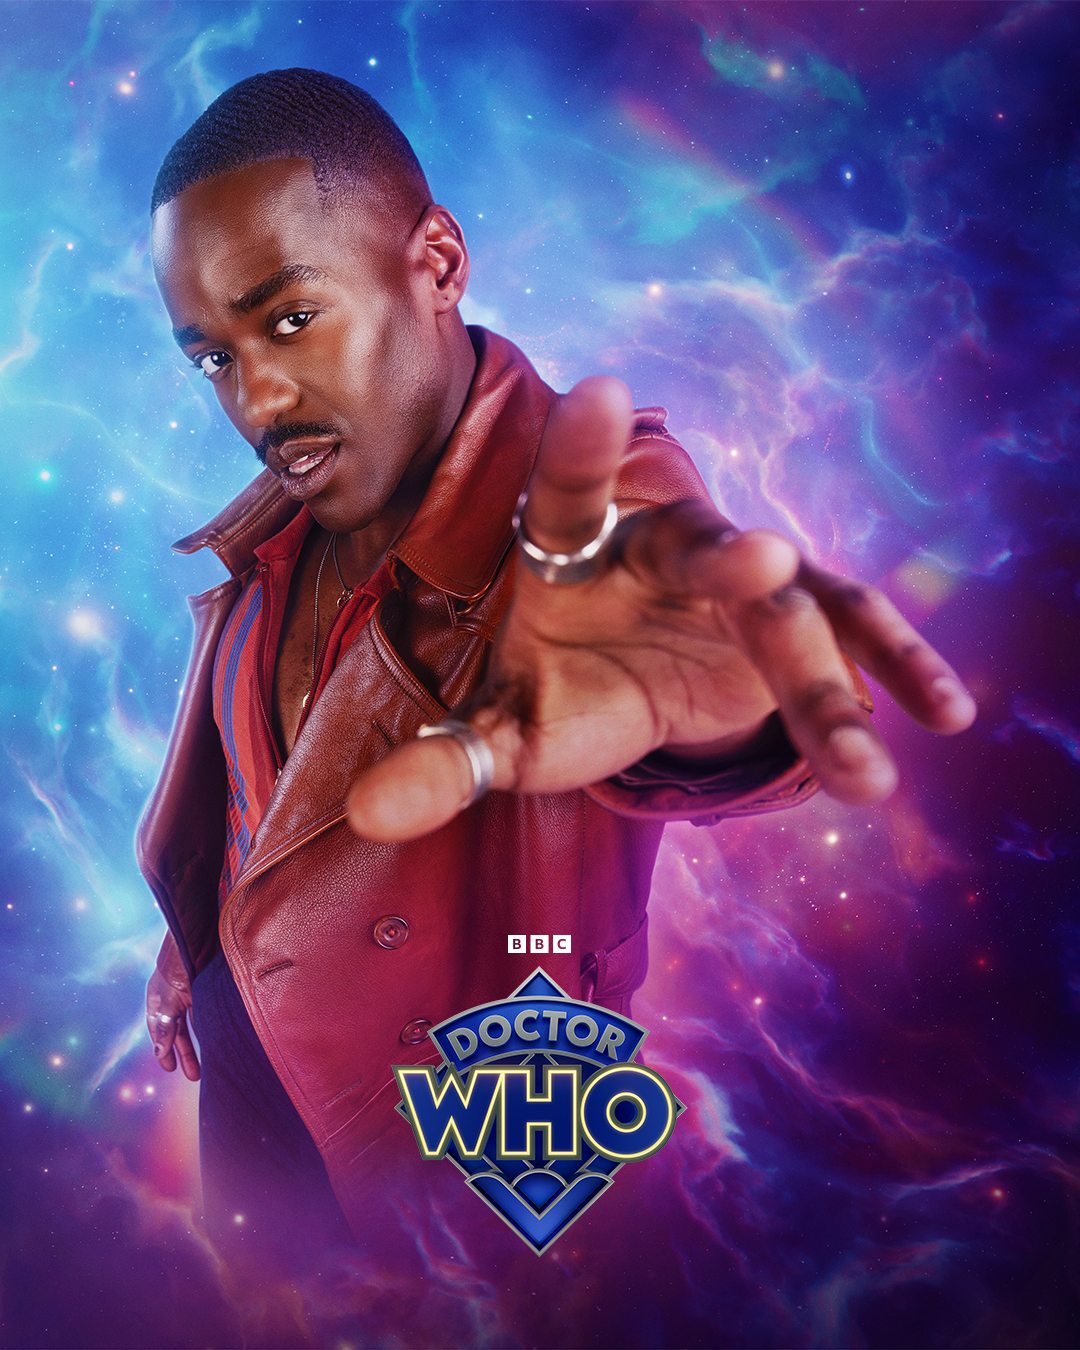 Character poster featuring Ncuti Gatwa as the Doctor in Doctor Who.